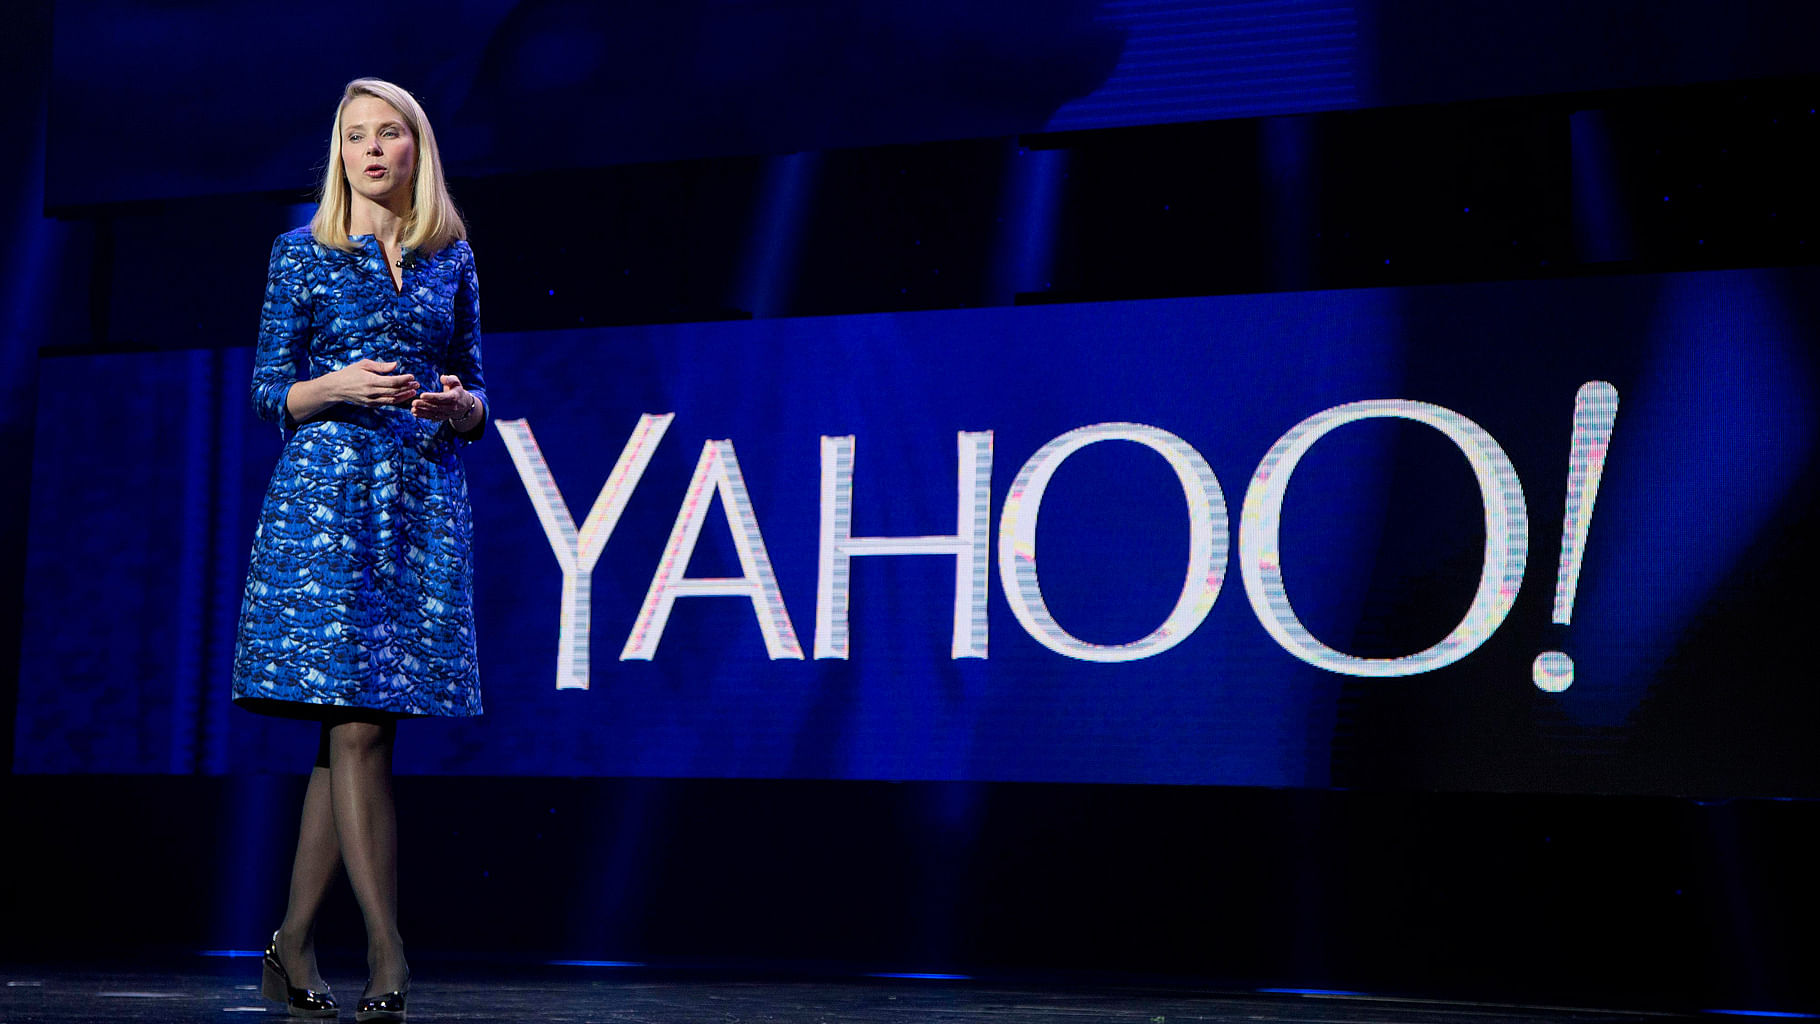 Yahoo might have to force users to reset their passwords, the Recode report said, citing unnamed sources. (Photo: AP)